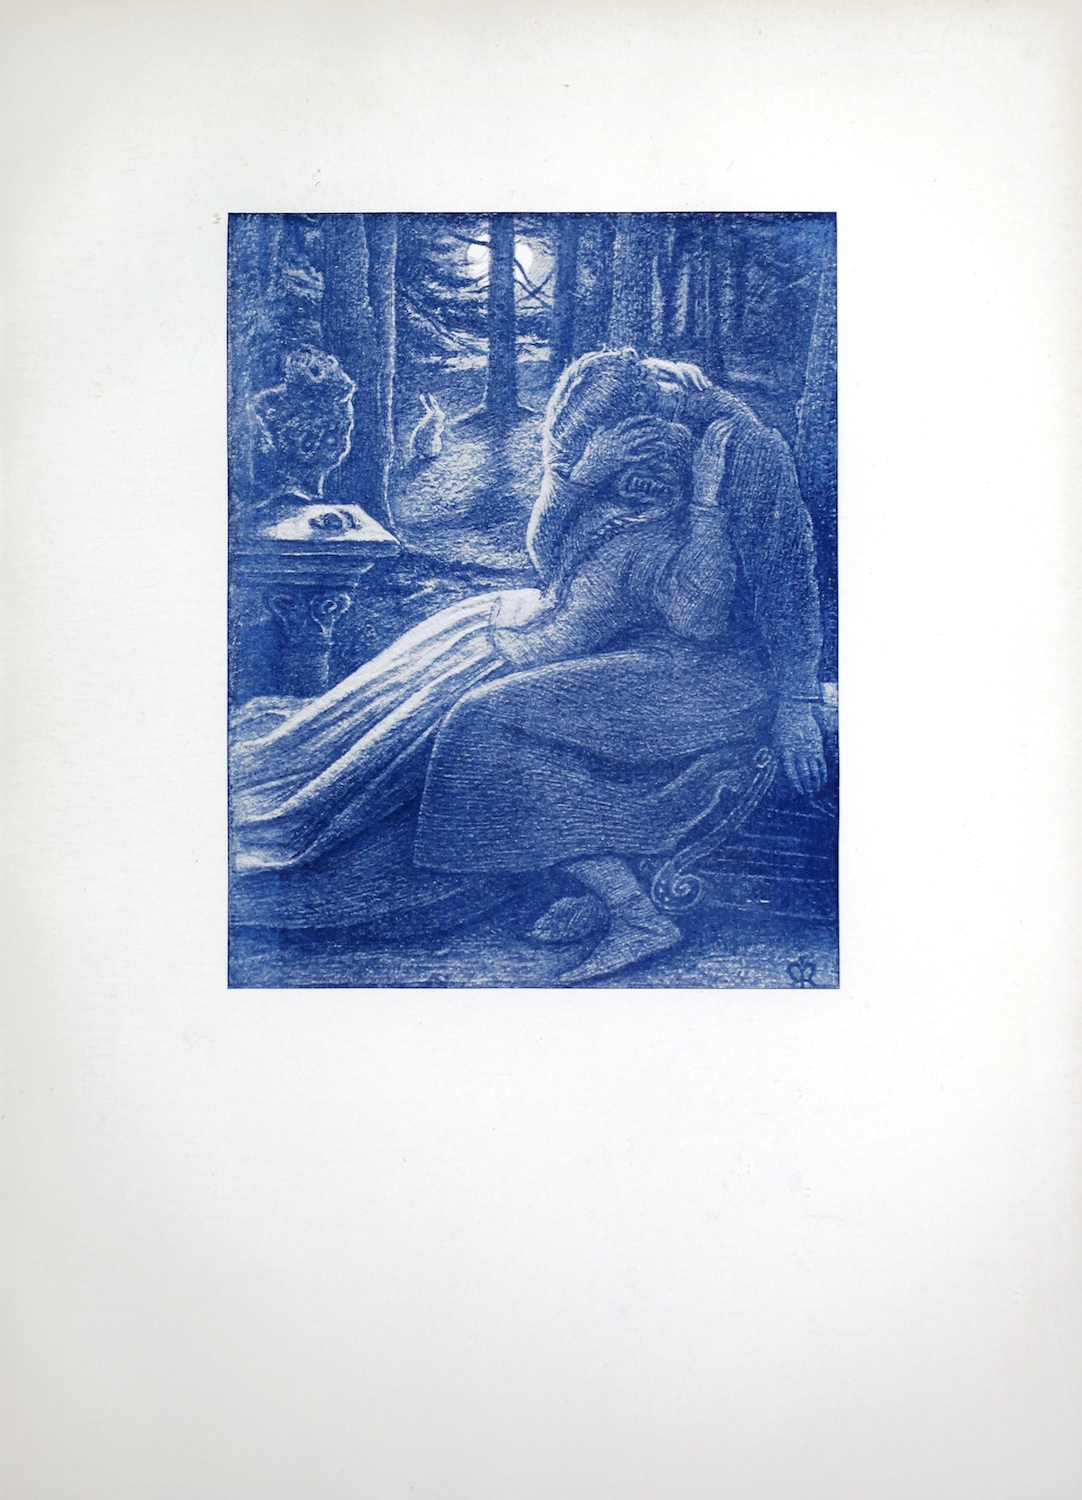 This blue half-tone image in portrait orientation reproduces a watercolour that Millais prepared to illustrate a poem by Samuel Taylor Coleridge for an illustrated edition called Poets of the Nineteenth Century (Dalziel, 1857). The image shows two lovers embracing on a moonlit terrace in front of a grove of fir trees. At left, a man sits on a stone bench with his face turned away from the viewer. He is in profile facing left. He wears a long robe. His left arm hangs at his side, holding a lyre or harp; his right hand holds his lover at the back of her head. The female figure is turned to the right with her back to the viewer; a long braid trails down her back. Her face is pressed into the male figure’s chest. Her left hand rests on his right shoulder. She is wearing a long dress and her legs are stretched out to the far left of the picture frame; she lies full-length on the ground and rests against her lover. At left, behind the woman, is a short, stylized pillar that seems to mark the edge of the patio or terrace where the lovers have met. Behind the pillar a bear is standing on its hind legs, reaching up a tree trunk. The bear gazes upward and only its head and front legs are visible to the viewer. The bear is oblivious to the lovers. The grove of trees in the background is lit with a full moon visible behind a central tree trunk. The moonlight shines on the forest ground revealing a rabbit or hare standing on the lawn. Shadows from the many trees stretch along the ground towards the viewer and the lovers in the foreground.